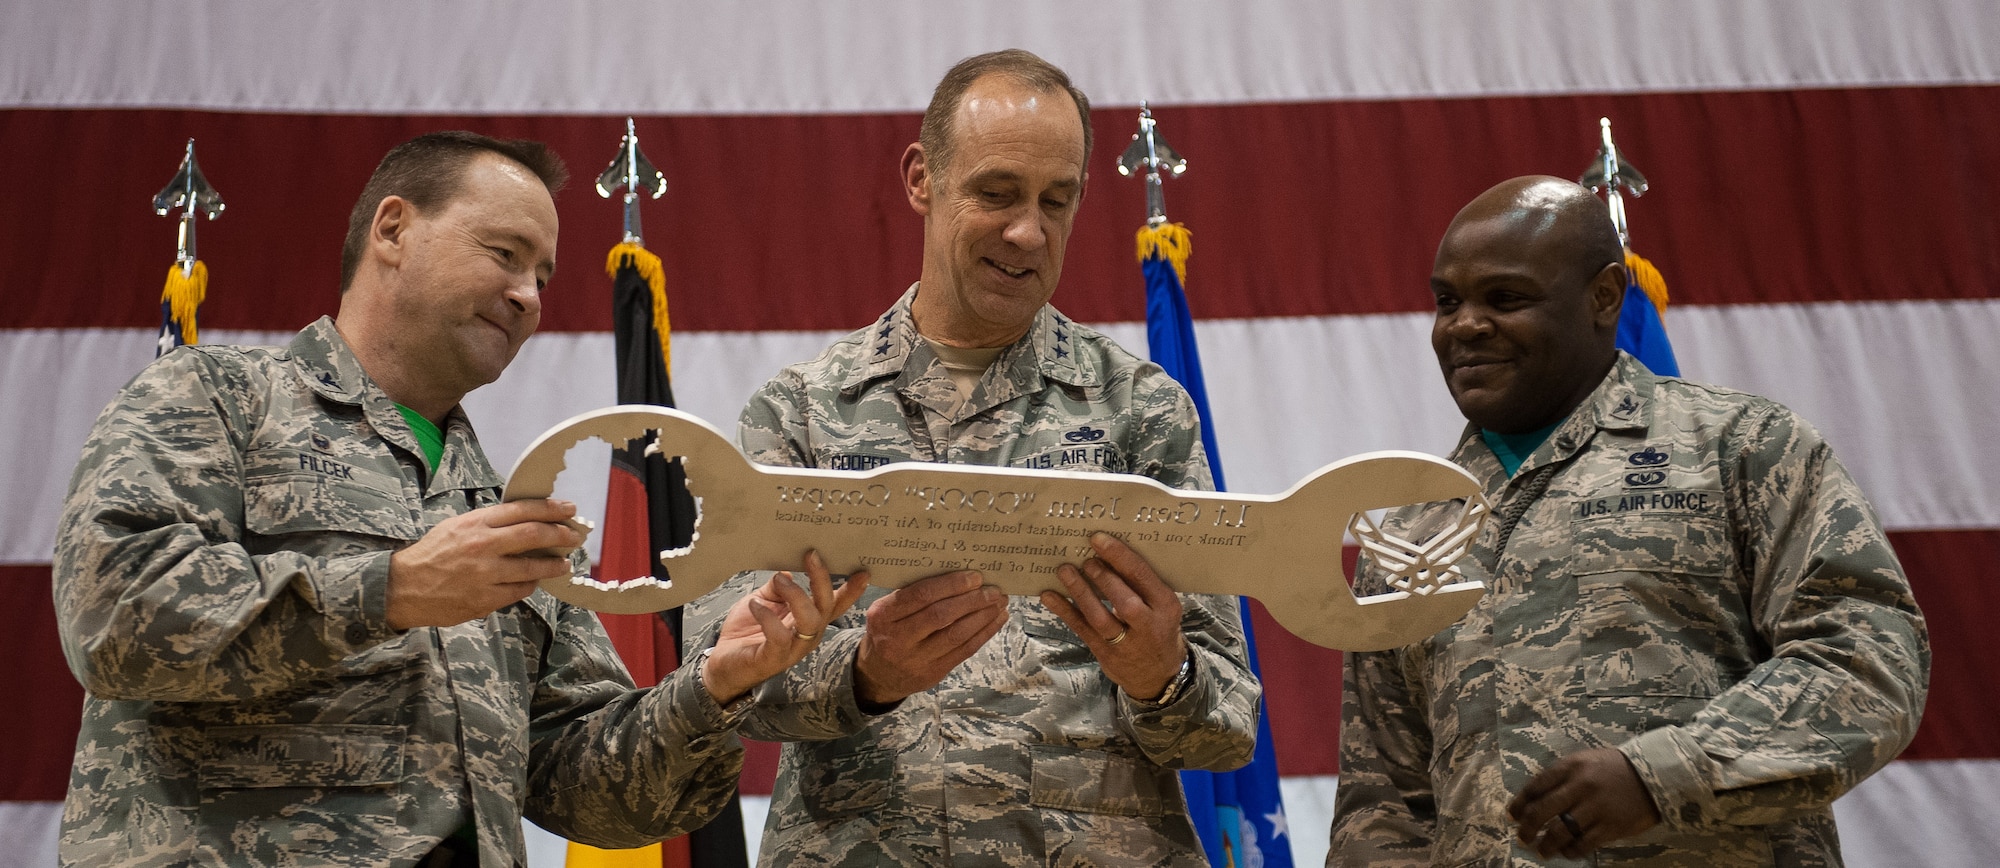 Lt. Gen. John B. Cooper, headquarters U.S. Air Force deputy chief of staff for logistics, engineering and force protection, receives a gift from Col. Paul Filcek, 86th Maintenance Group commander, and Col. Uduak Udoaka, 86th Logistics Readiness Squadron commander, at the 2016 Maintenance and Logistics Airmen Annual Award Ceremony on Ramstein Air Base, Germany, Feb. 17, 2017. Cooper joined Airmen who received annual awards on stage to reward them for their hard work throughout 2016. (U.S. Air Force photo by Senior Airman Lane T. Plummer)